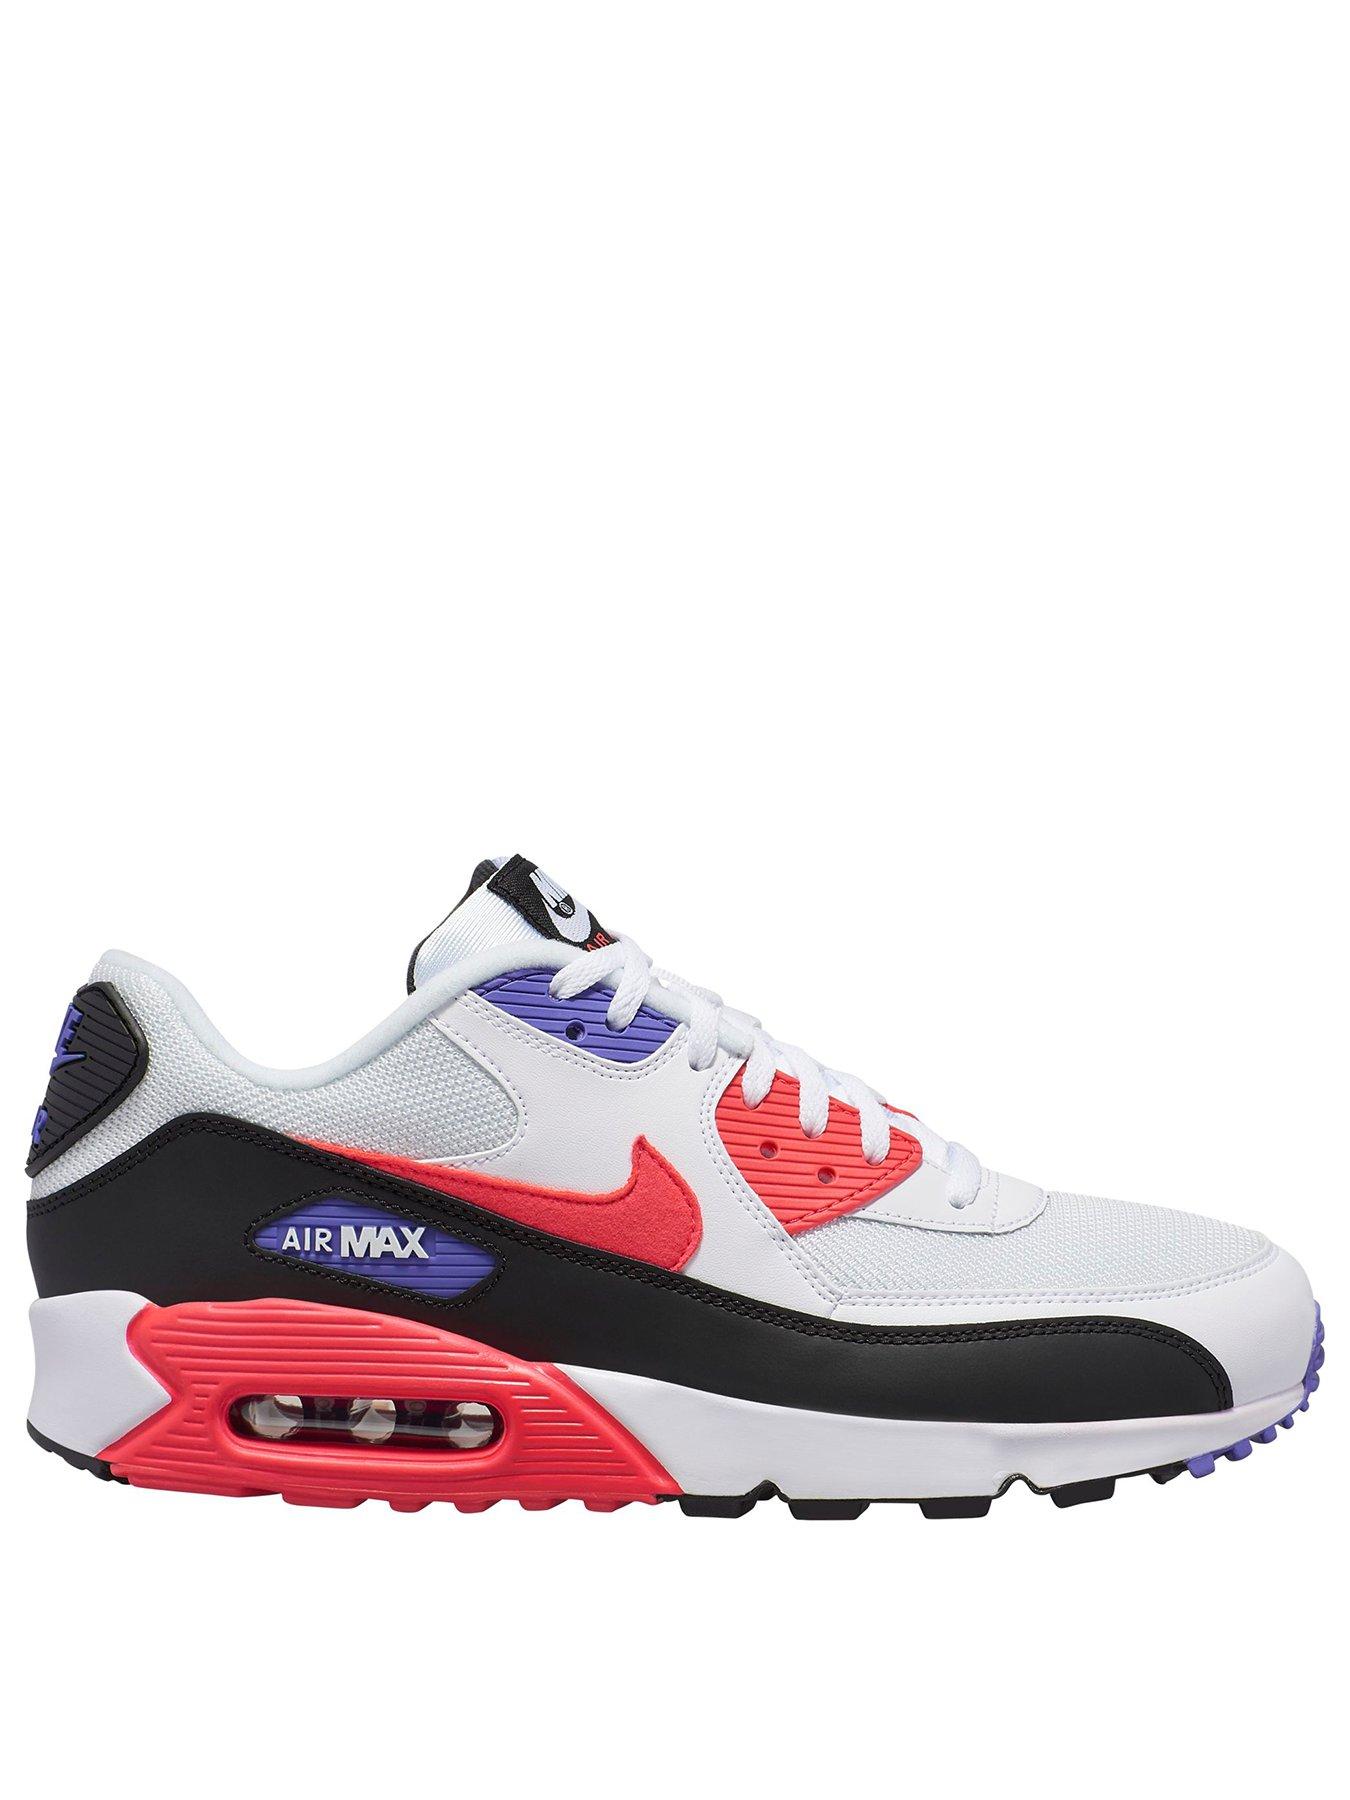 red black and white air maxes